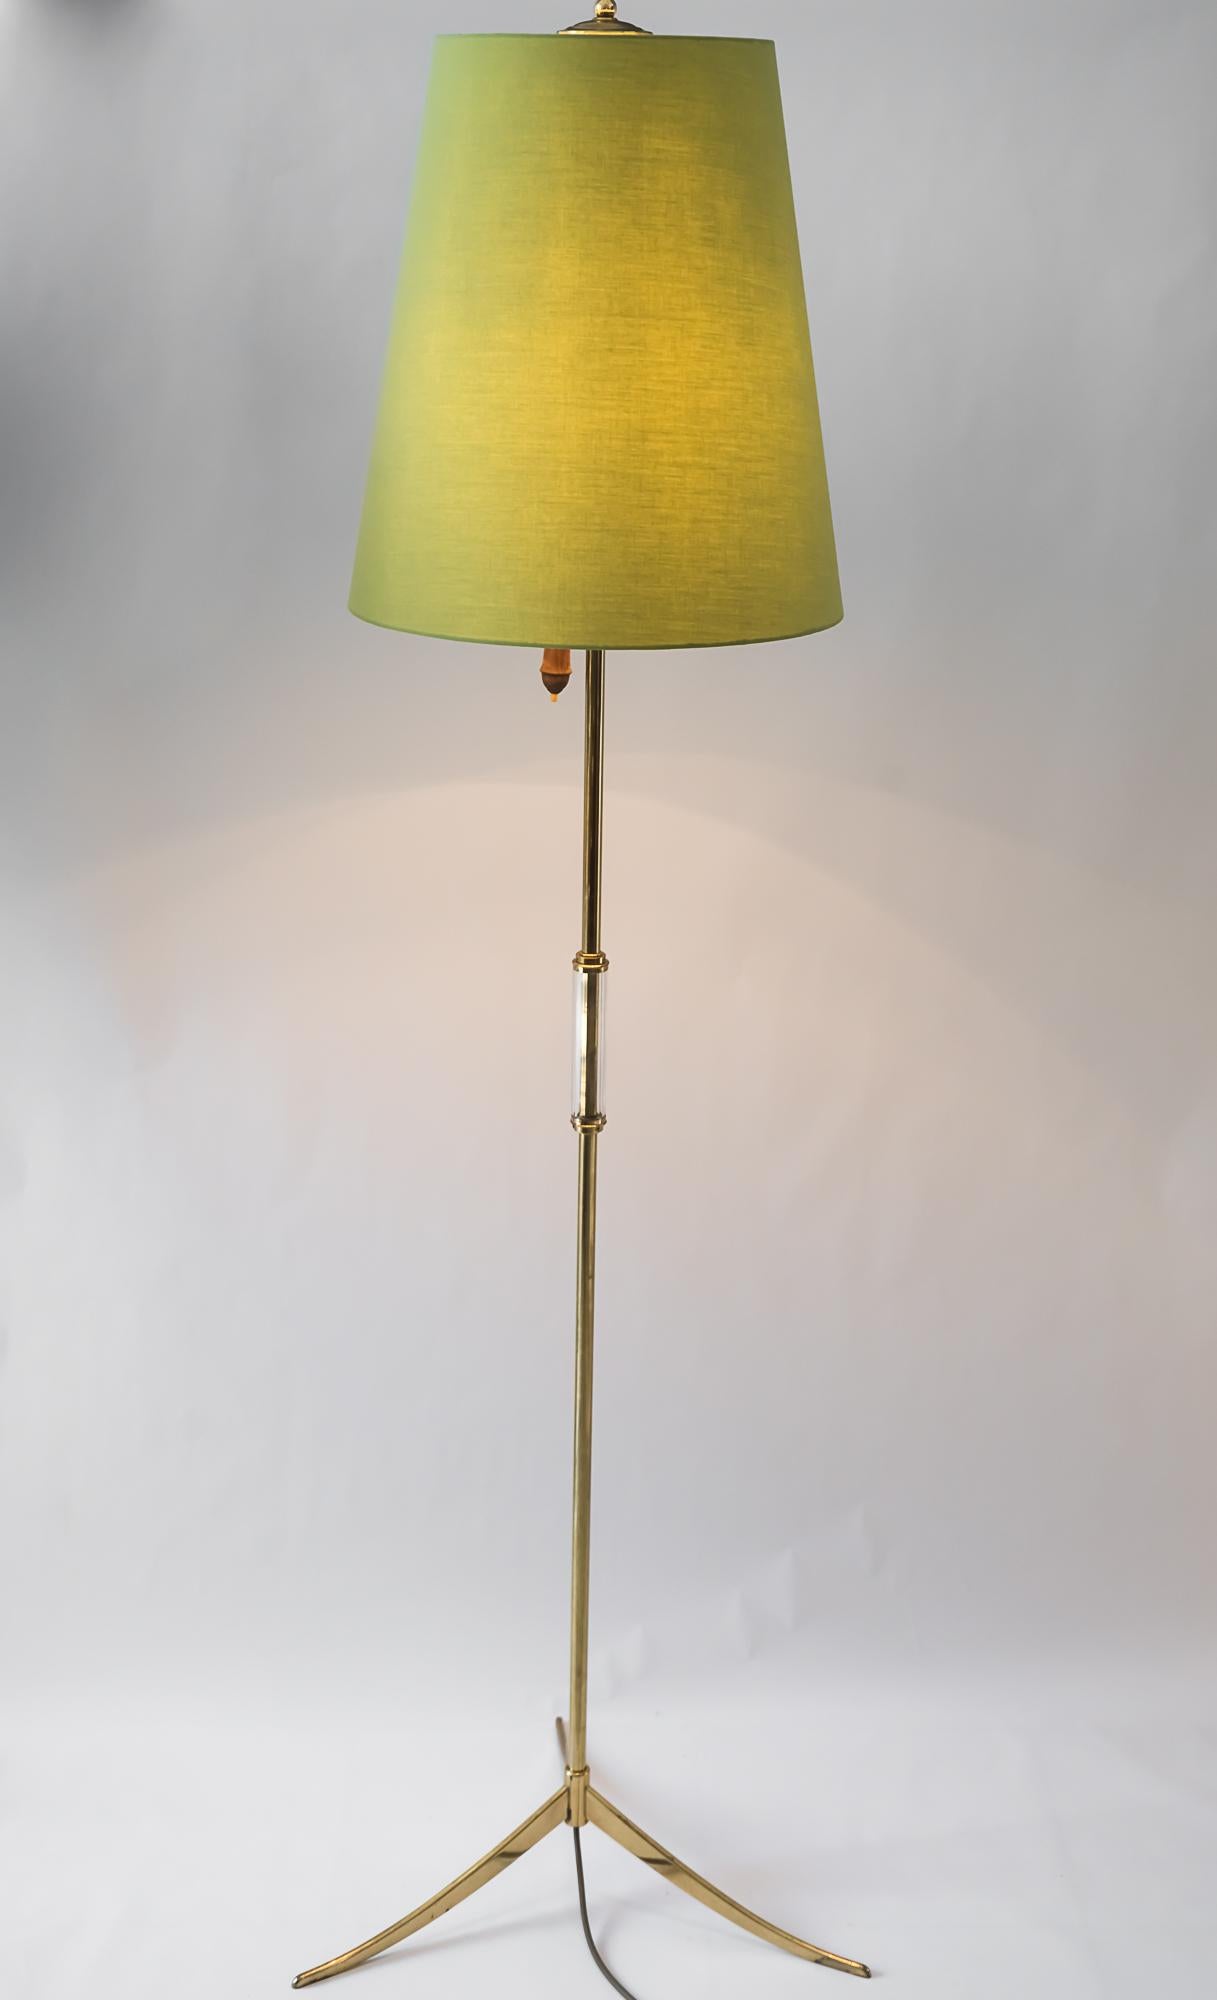 Floor lamp, Vienna, circa 1960s with glass handle
Original condition
The lampshade have been renewed as well based on the original dimensions. (New).